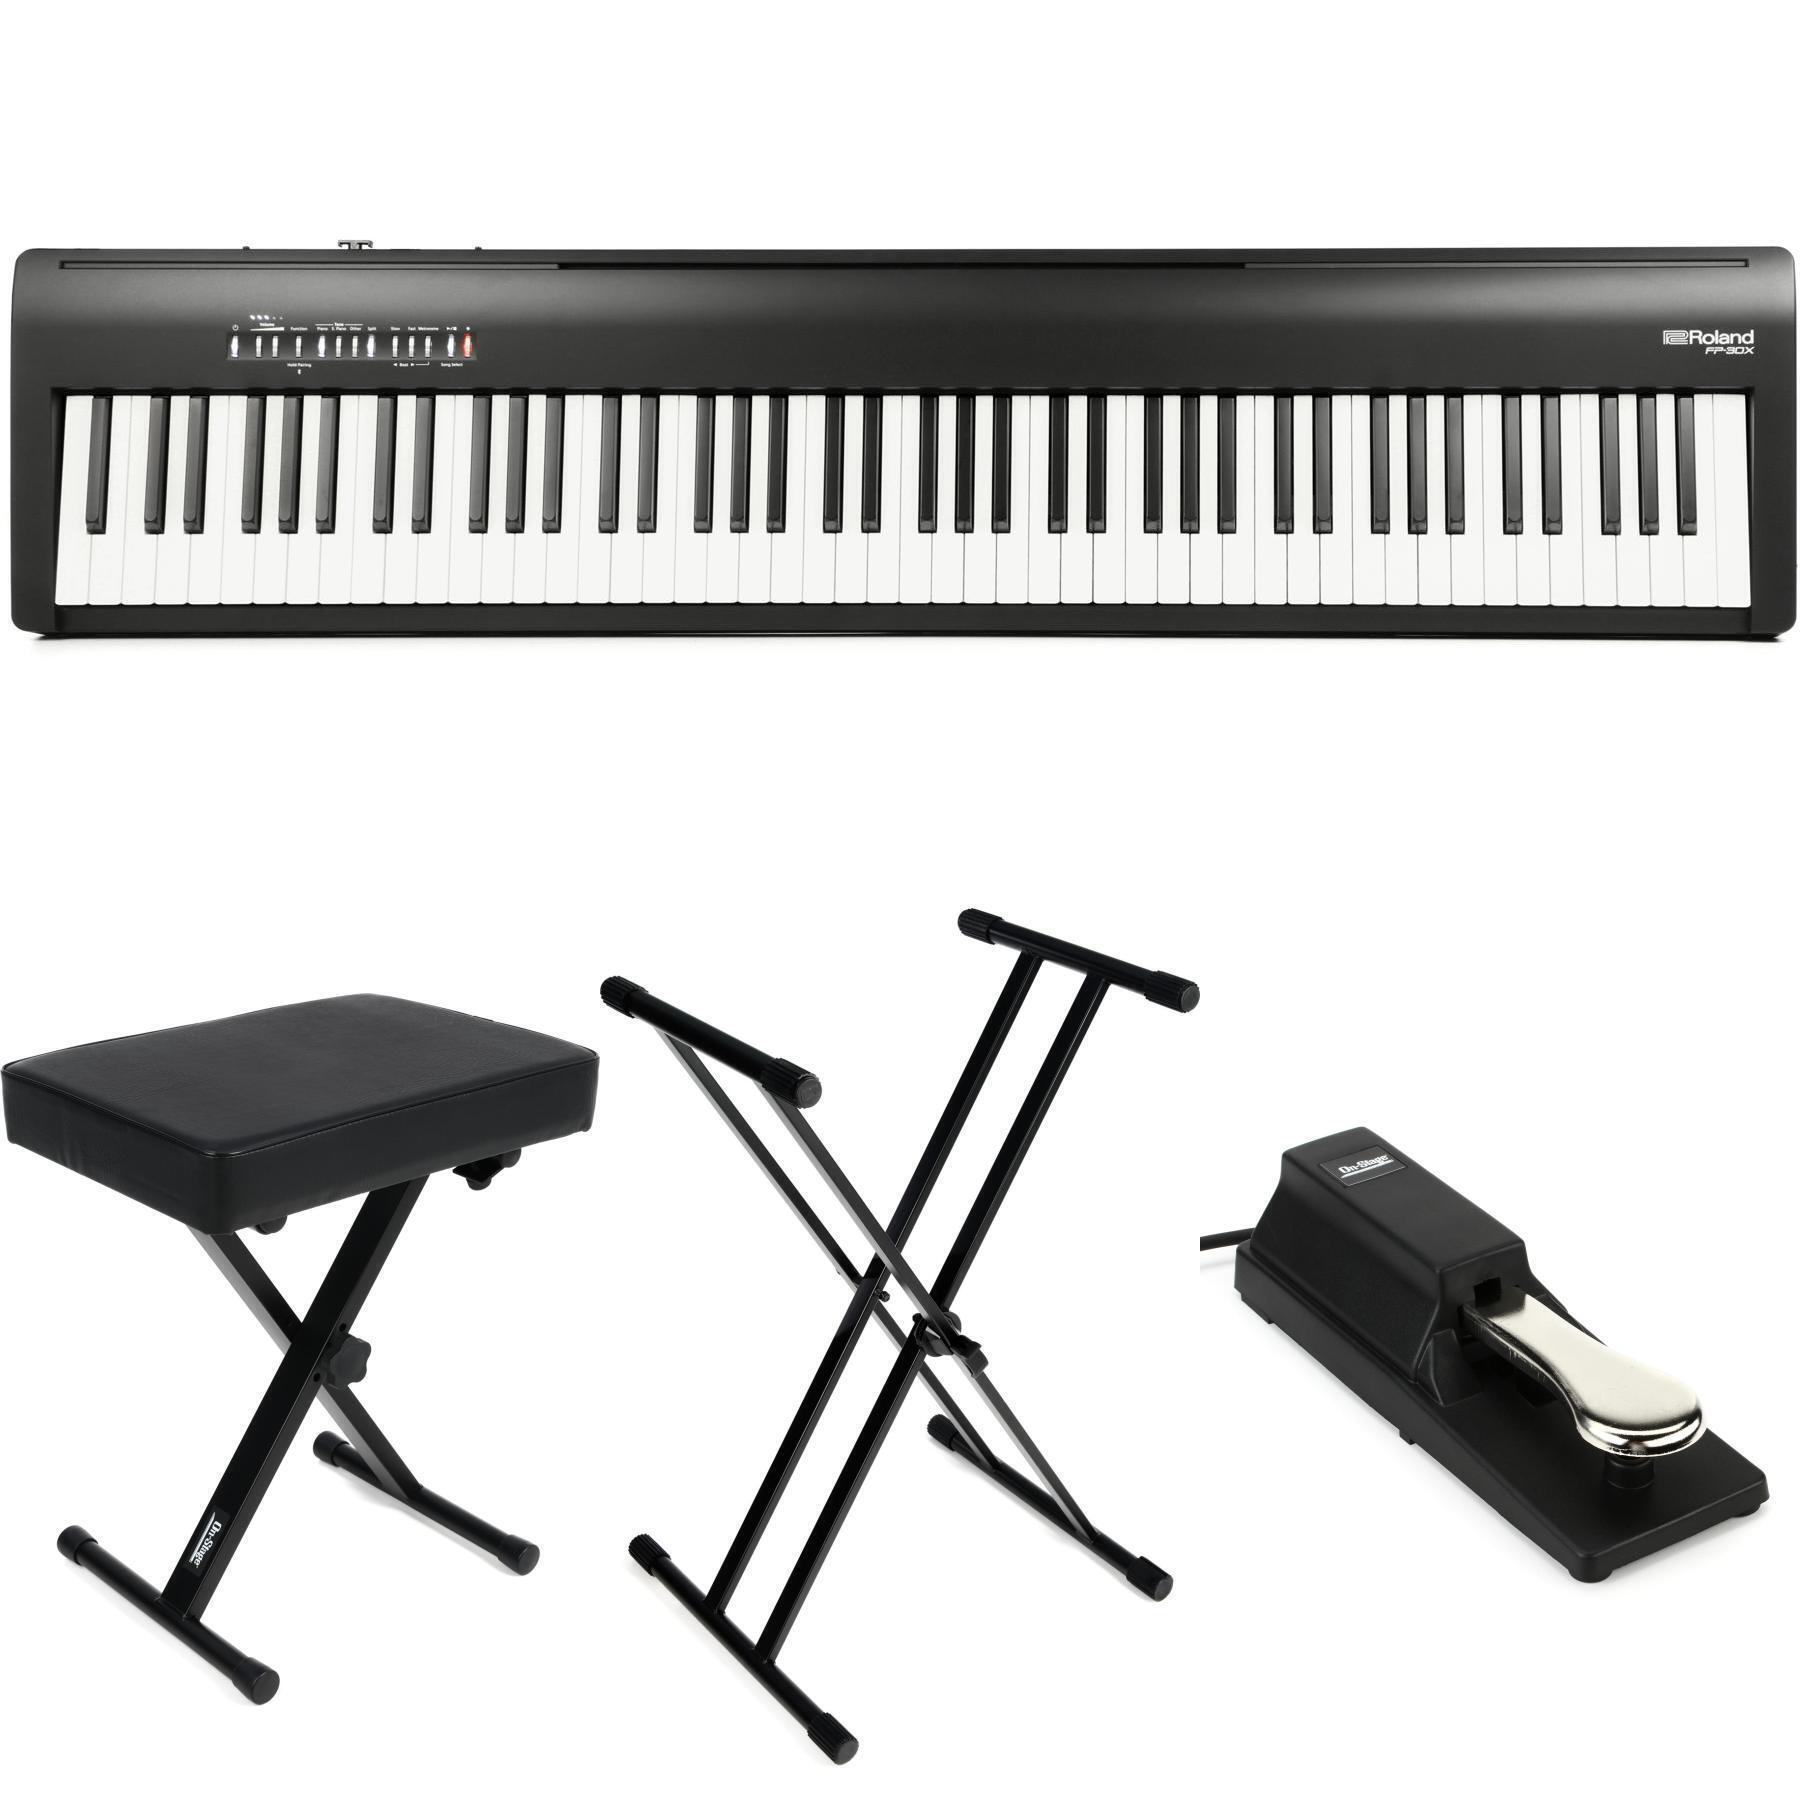  Roland FP-10 Digital Piano Bundle with Adjustable Stand, Bench,  Sustain Pedal, Instructional Book, Austin Bazaar Instructional DVD, Online  Piano Lessons, and Polishing Cloth : Musical Instruments